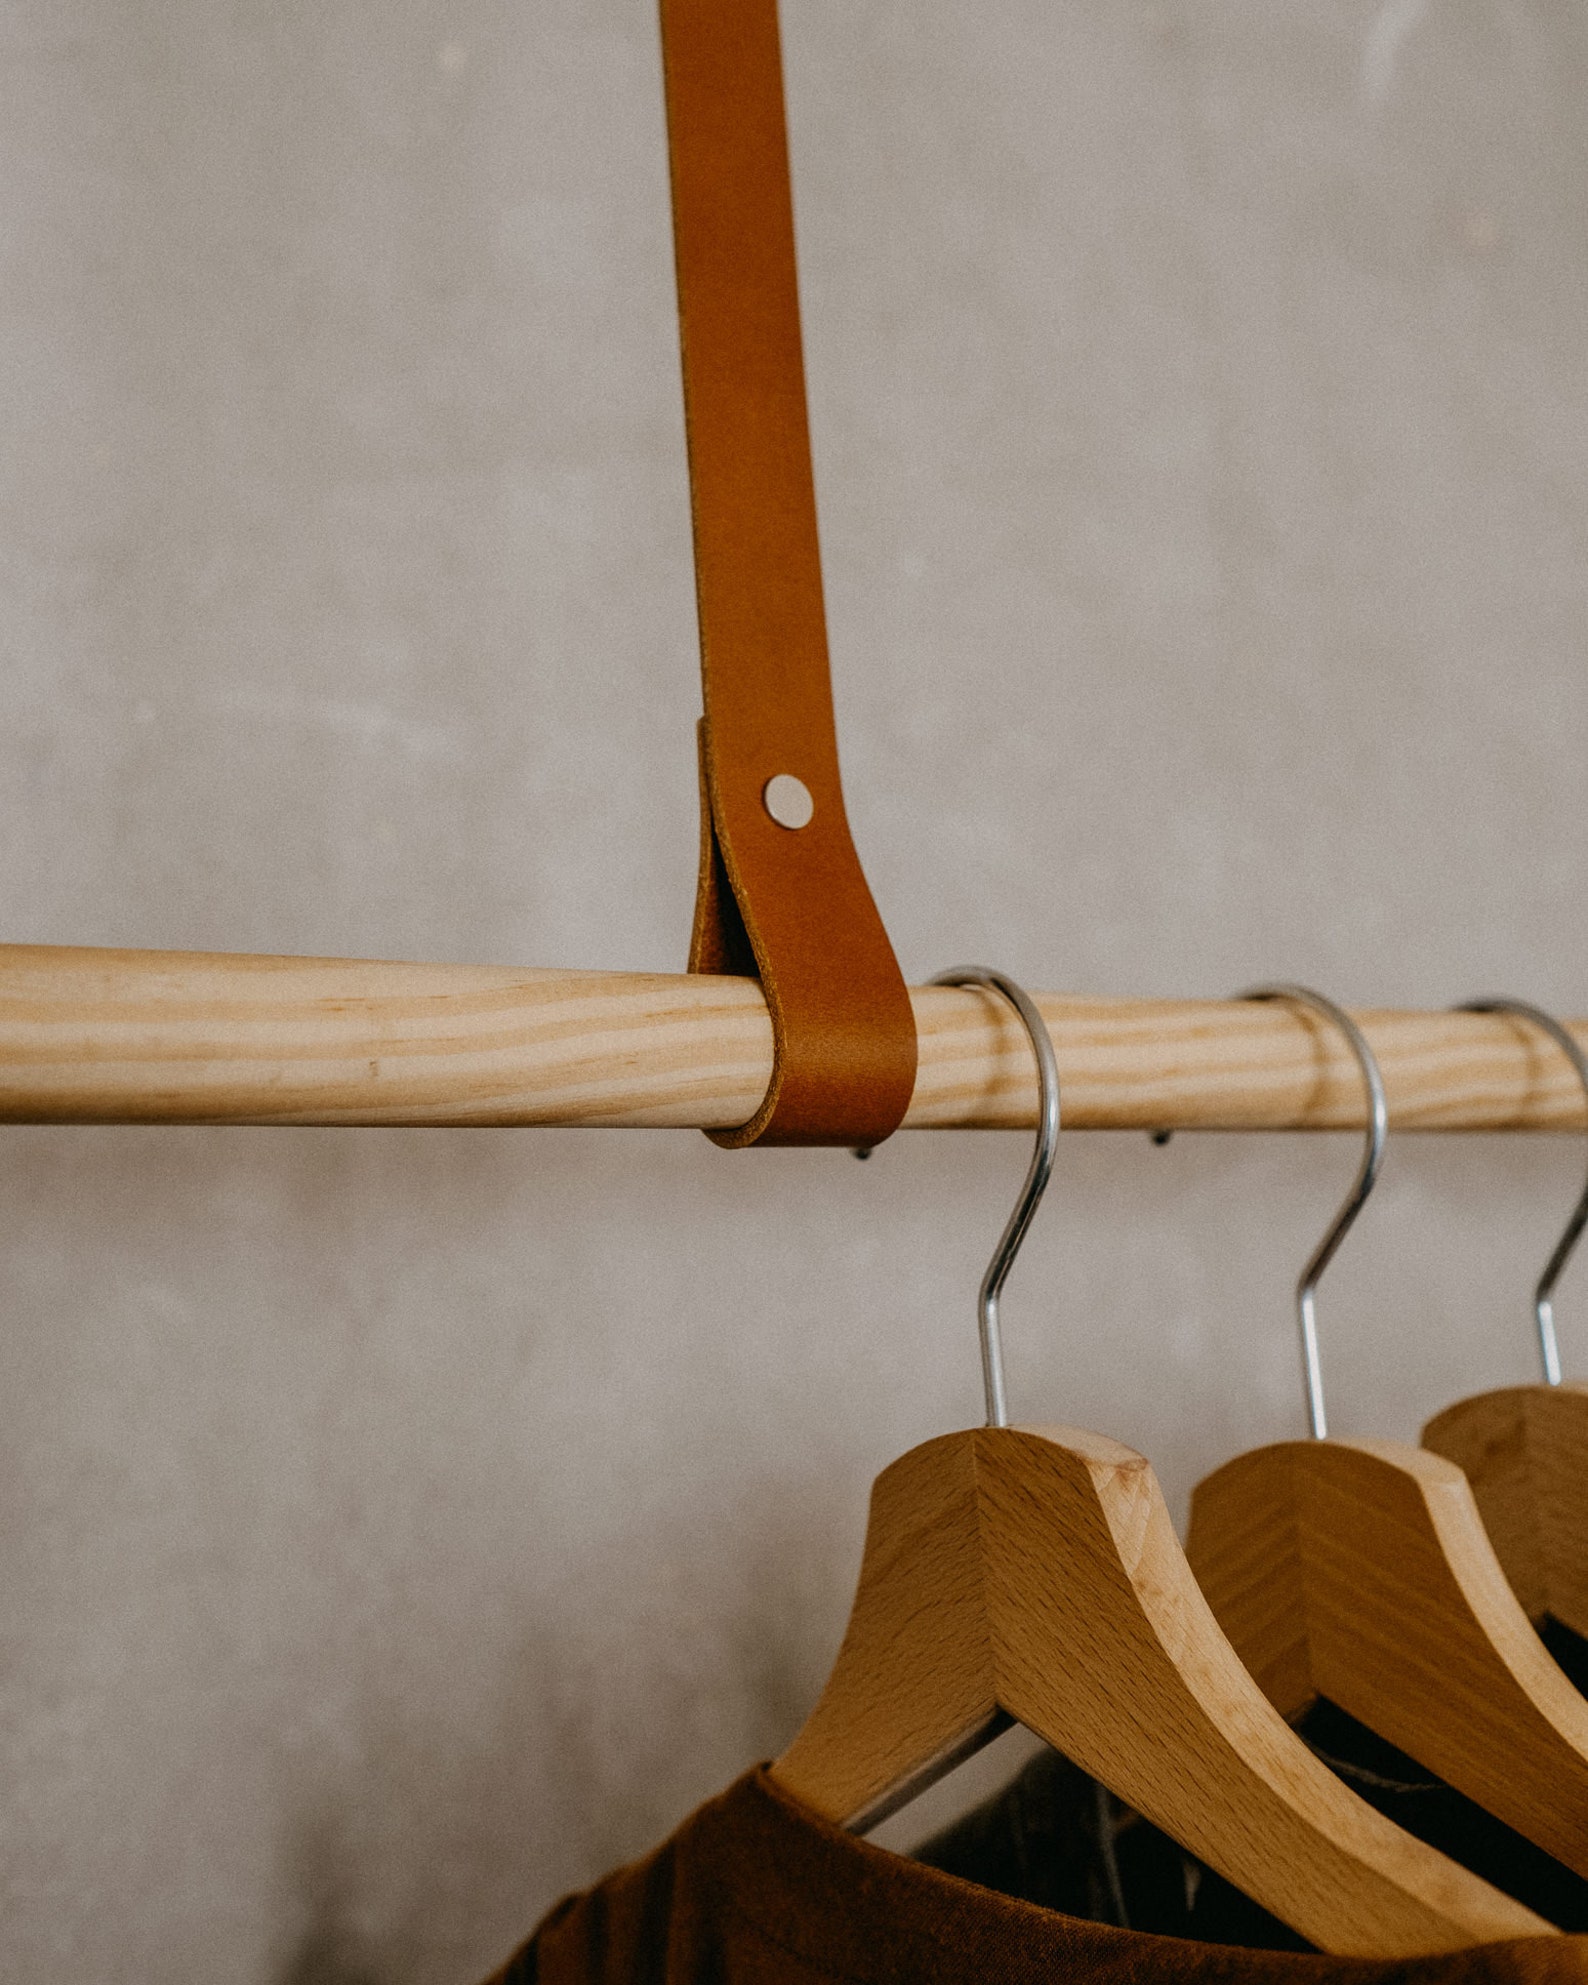 Leather Straps for Clothes Rail Hanging Clothing Rack - Etsy